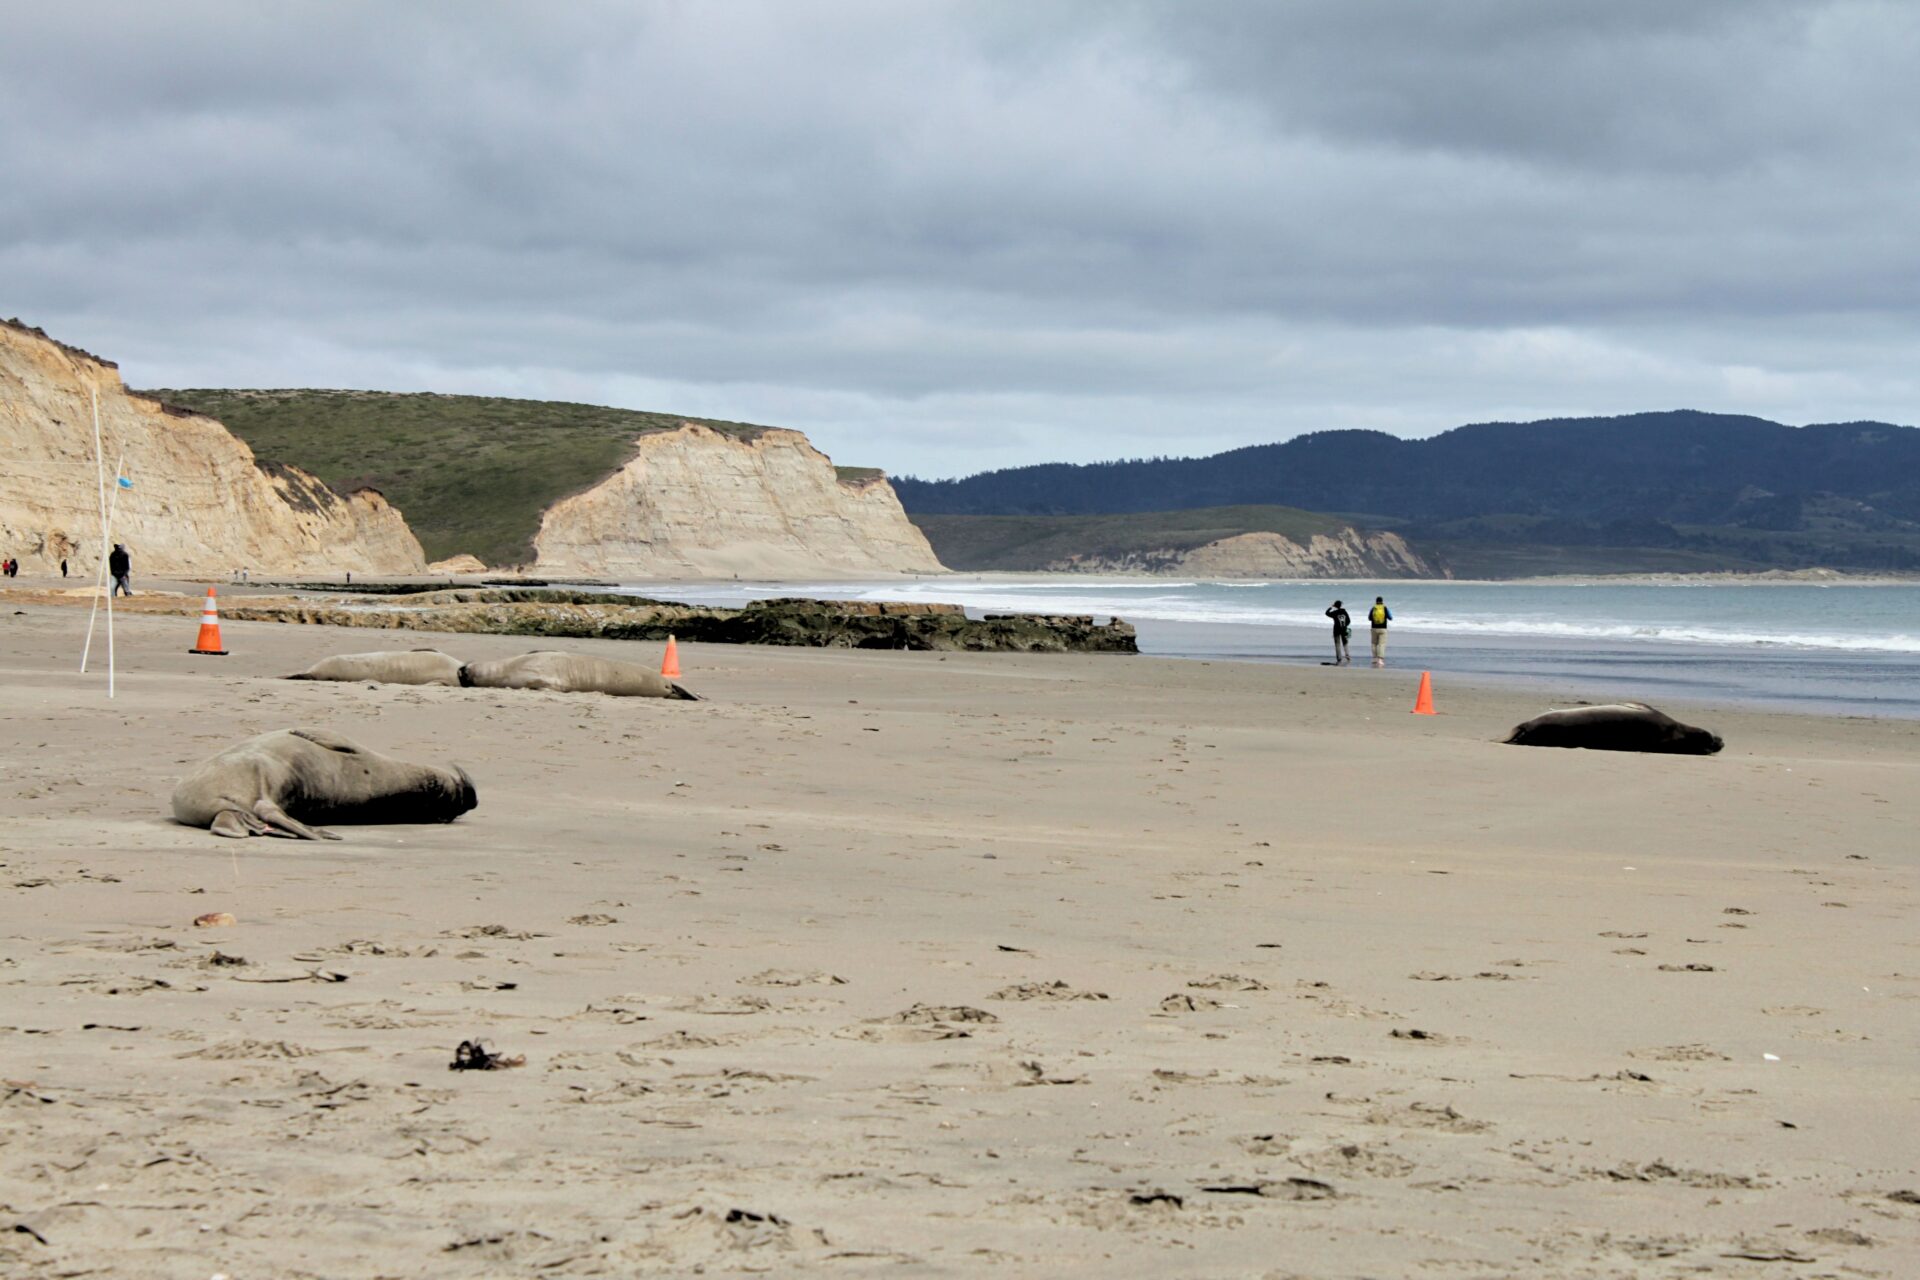 Point Reyes National Seashore: Fun at the End of the World